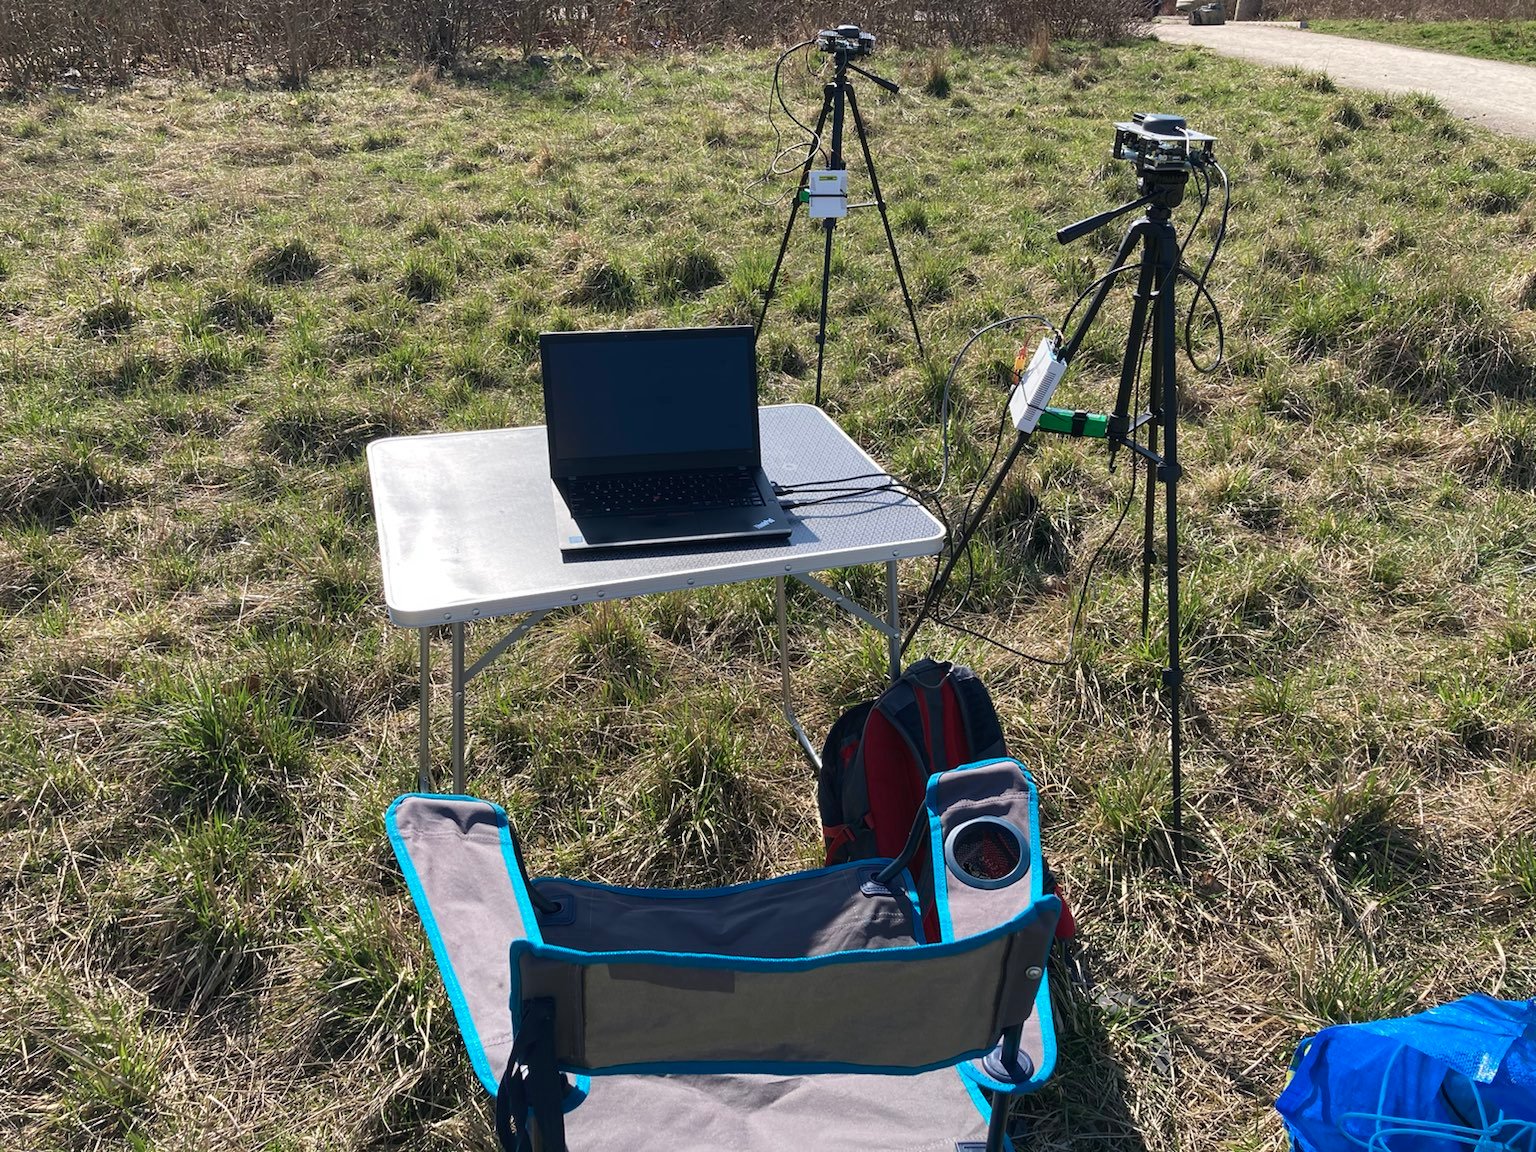 Test setup for a sunny day